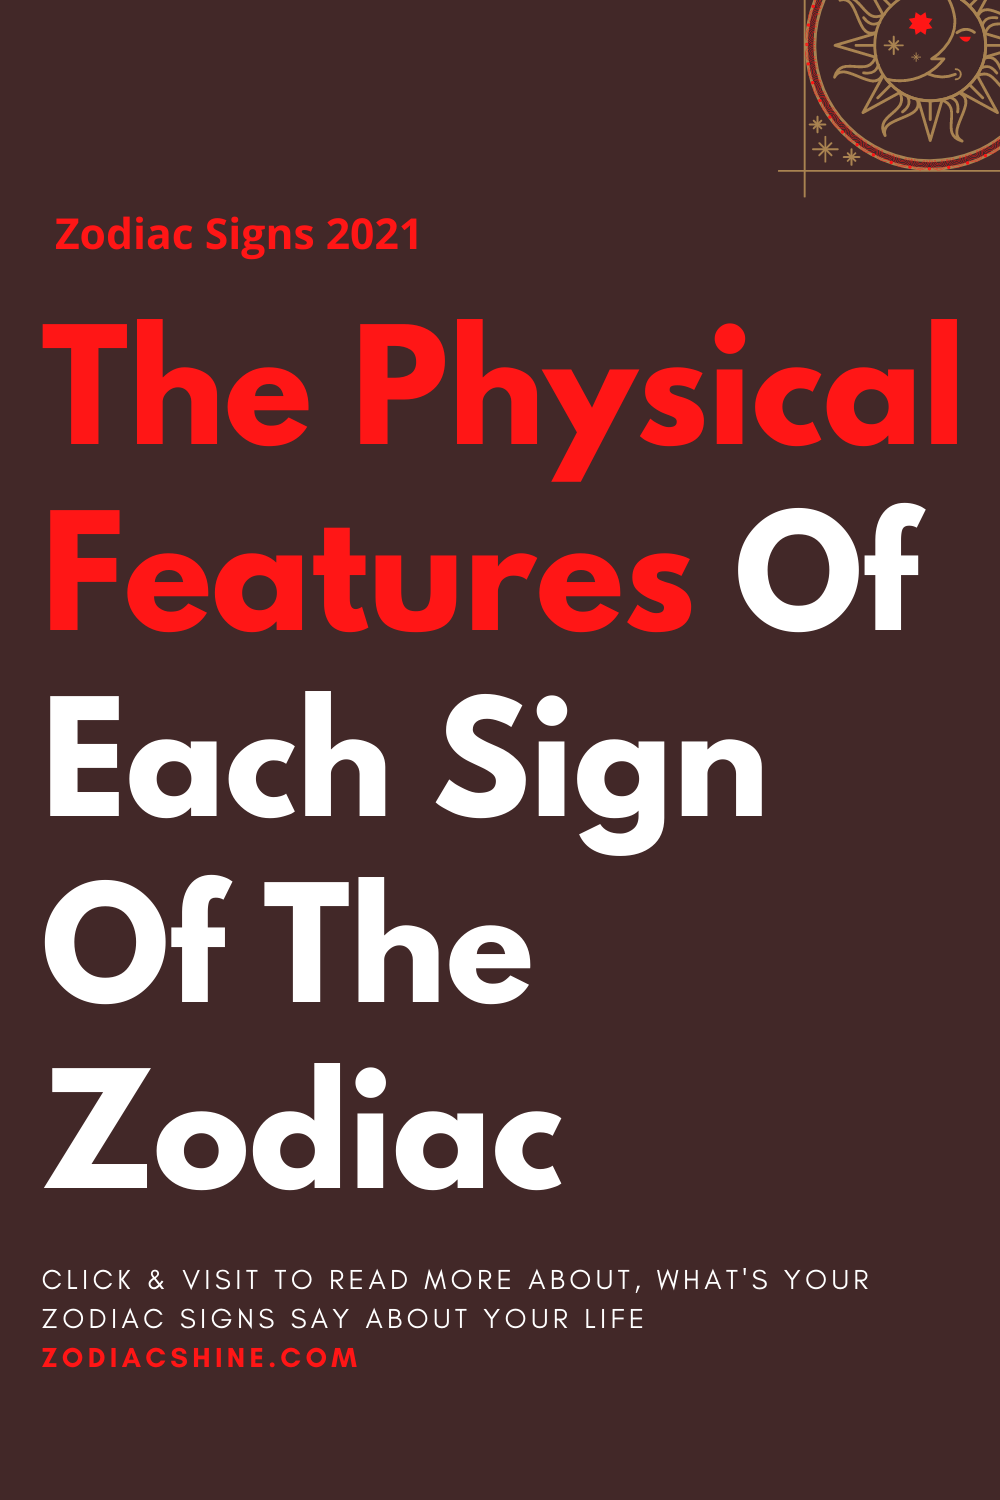 The Physical Features Of Each Sign Of The Zodiac